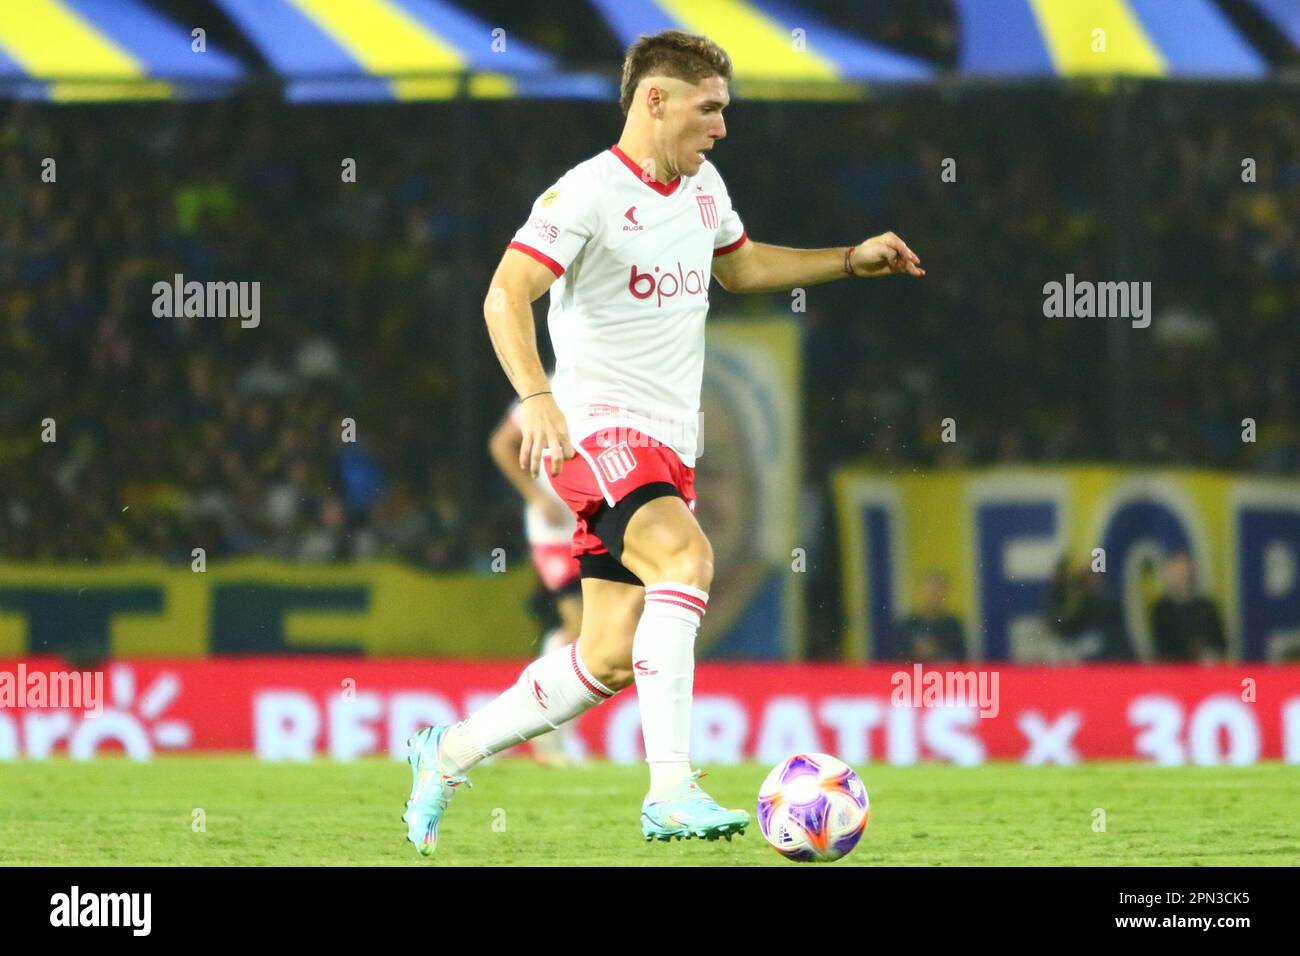 Buenos Aires, 15th Apr 2023, Benjamin Rollheiser during a match for the 12nd round of Argentina´s Liga Profesional de Fútbol Binance Cup Stock Photo